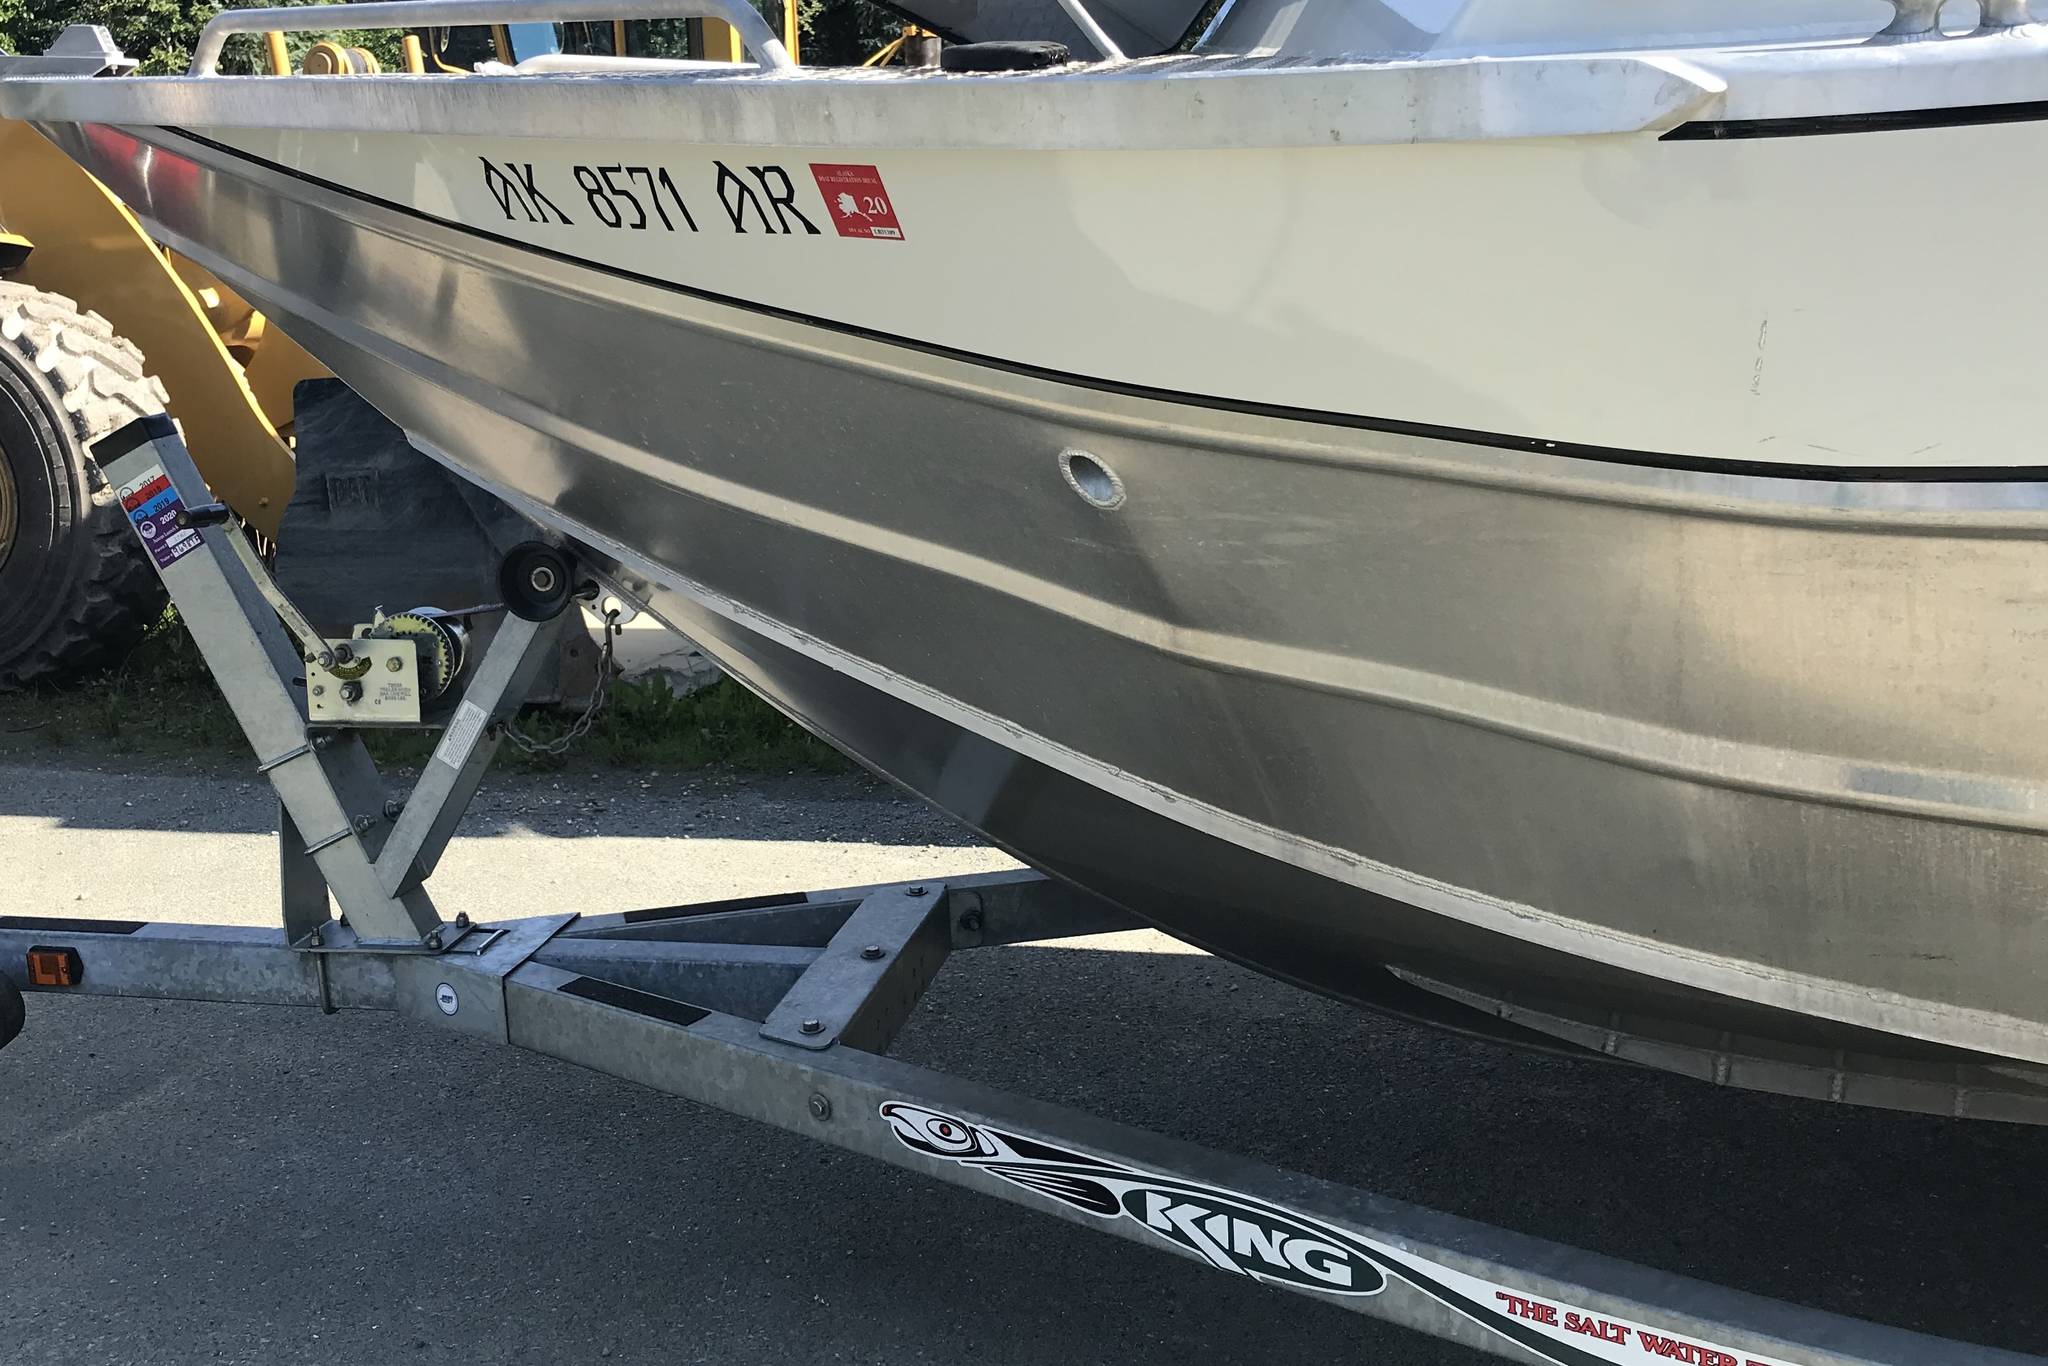 Faint damage can be seen where Joe and Kendall Carson’s boat struck a whale in a June 29 collision that left three people injured. (Courtesy photo | Kendall Carson)